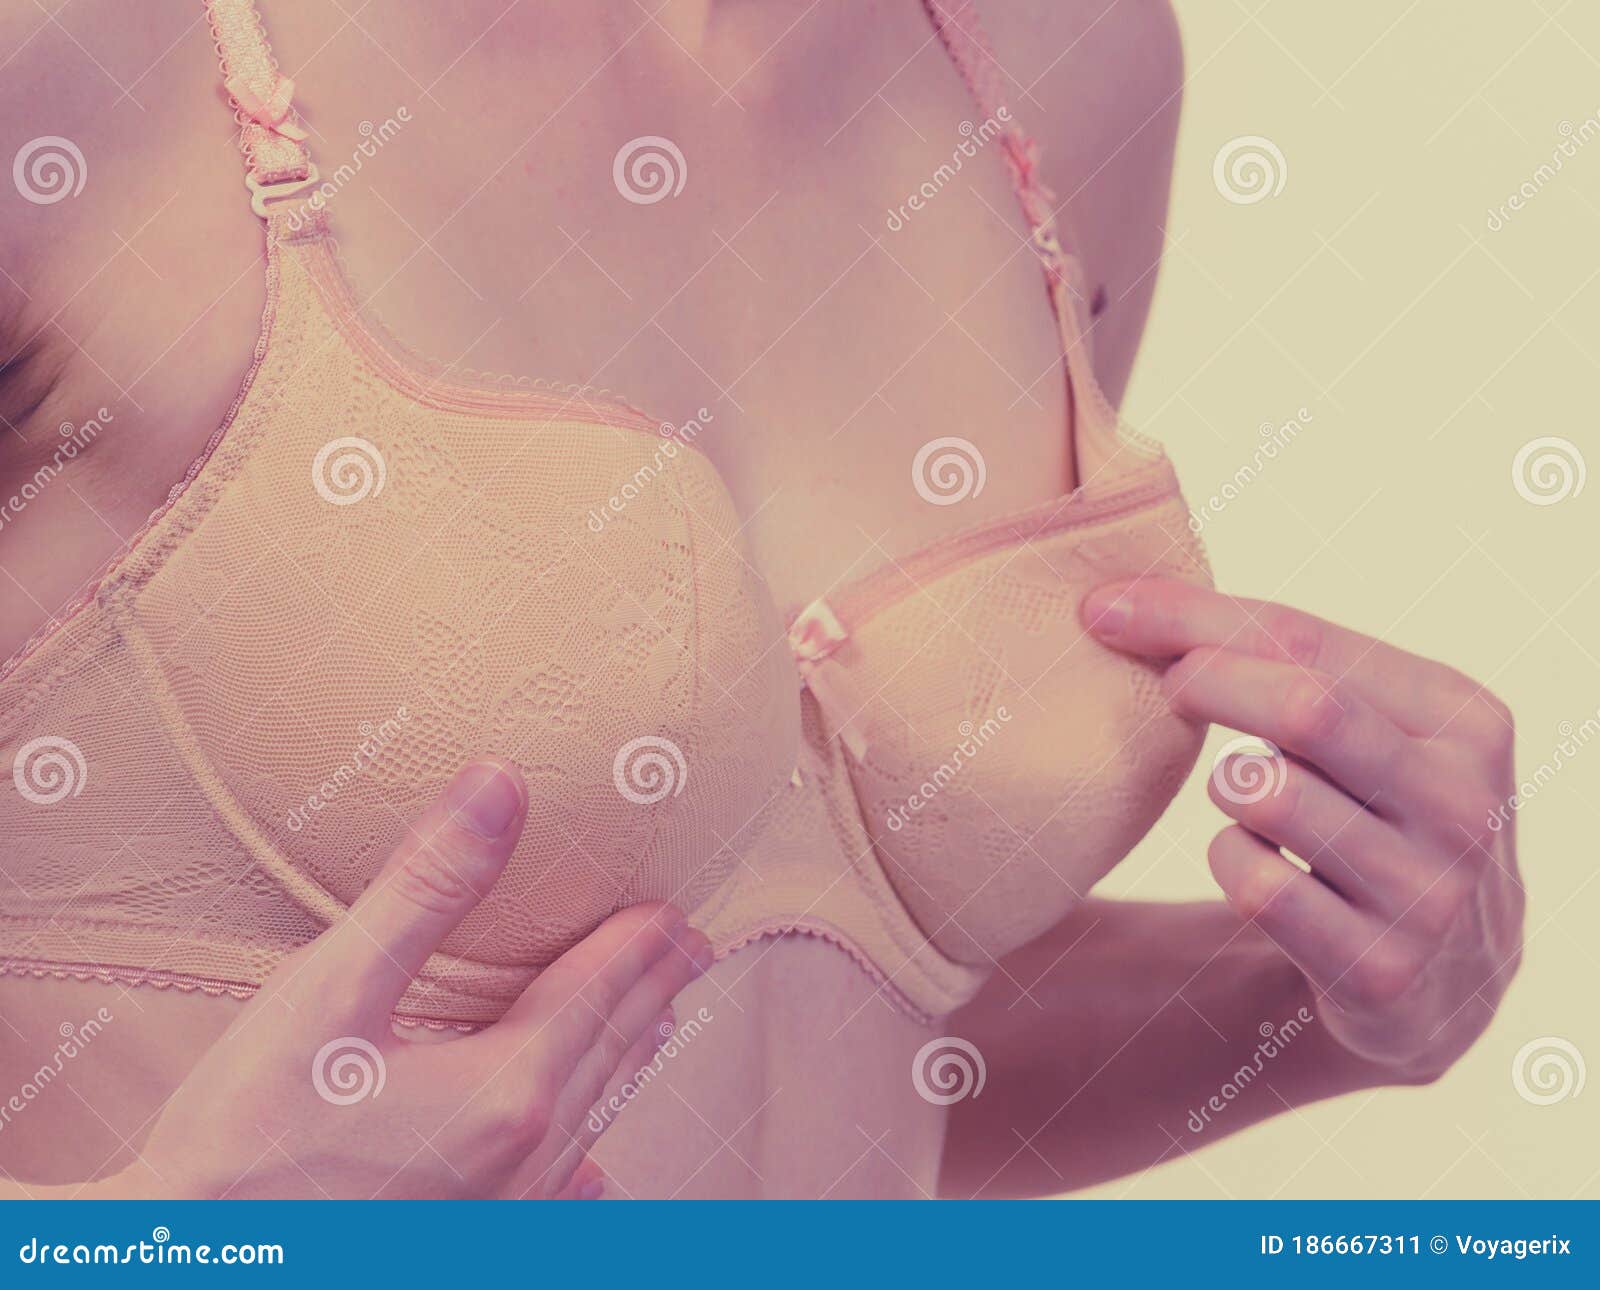 Young Woman Small Boobs Wearing Uncomfortable Bra With Too Big Cup. Female  Breast Wrong Size Lingerie. Bosom, Fitting And Underwear. Stock Photo,  Picture and Royalty Free Image. Image 159566264.